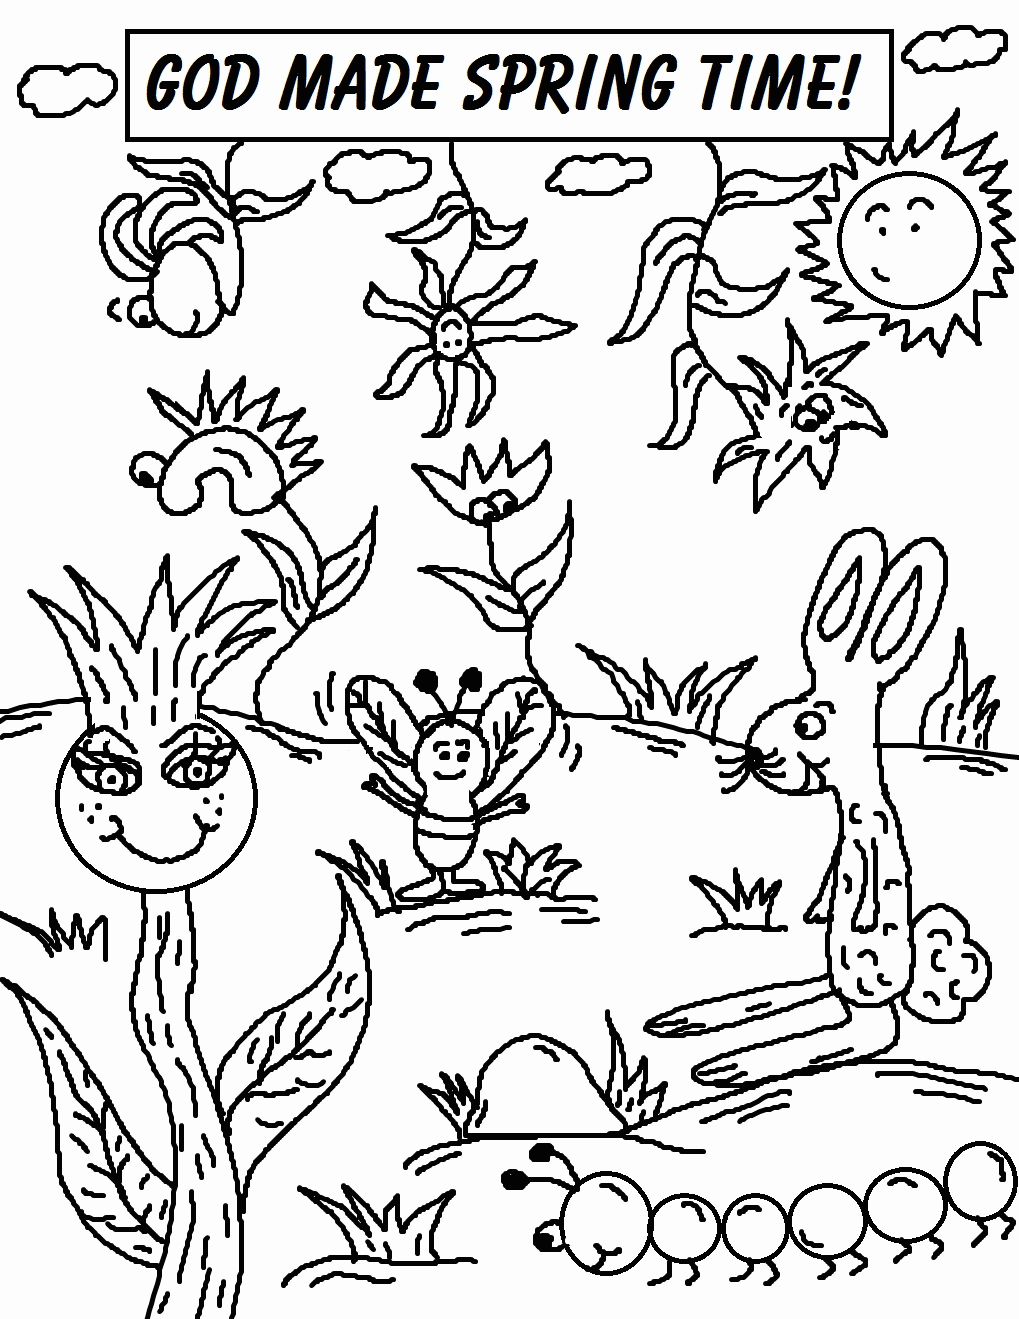 Spring Coloring Pages GOD MADE SPRING TIME! Free Printable